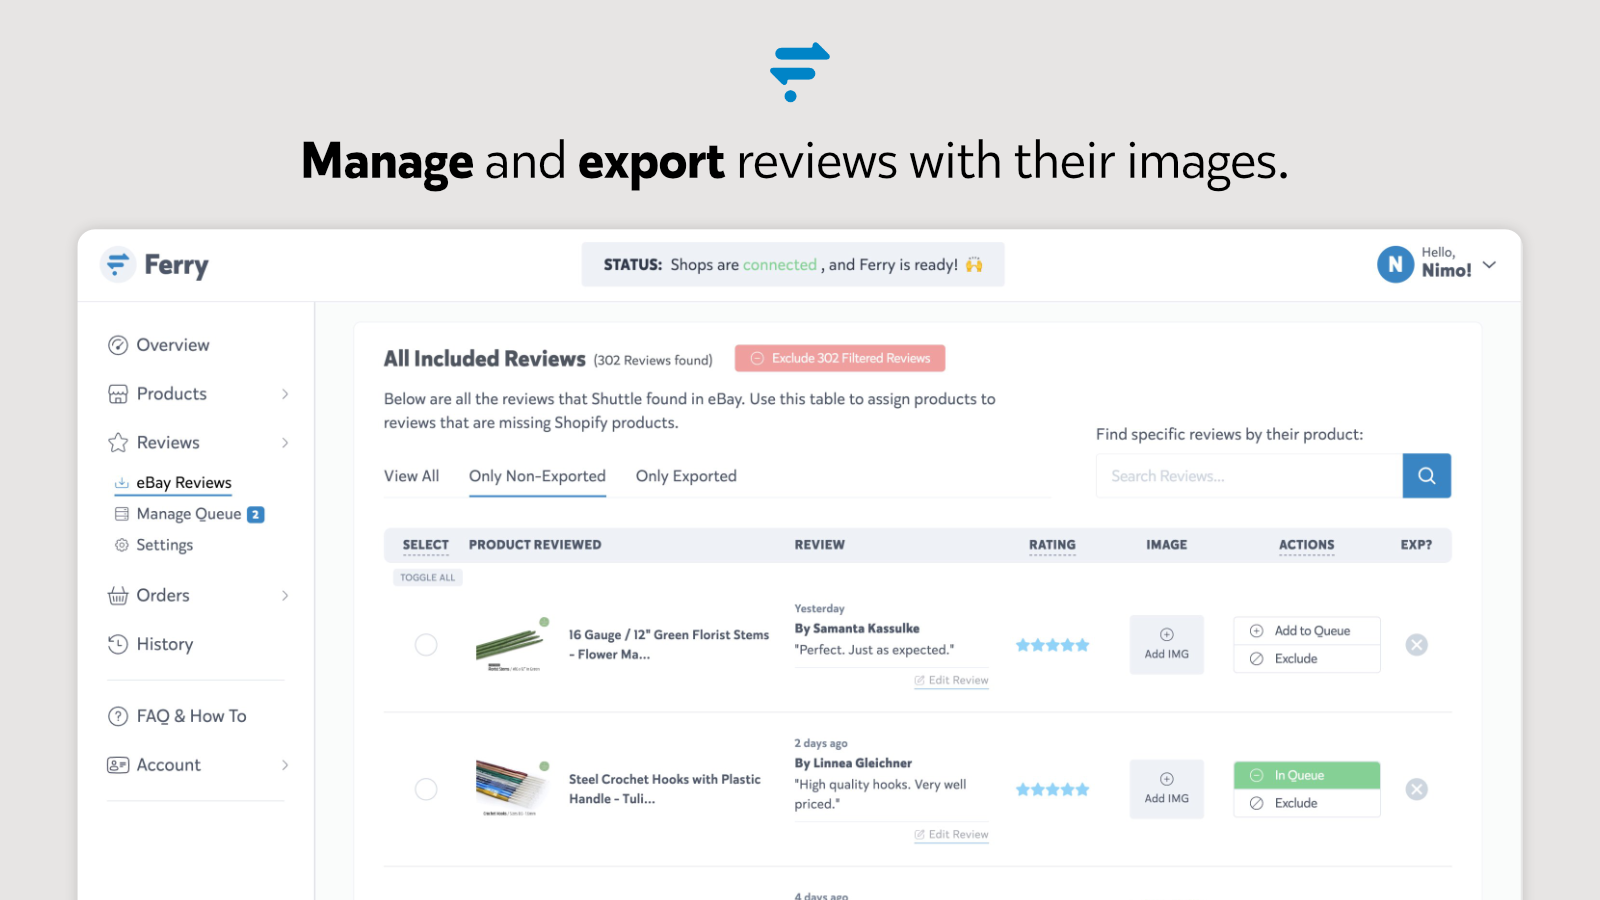 Manage and export reviews with their images